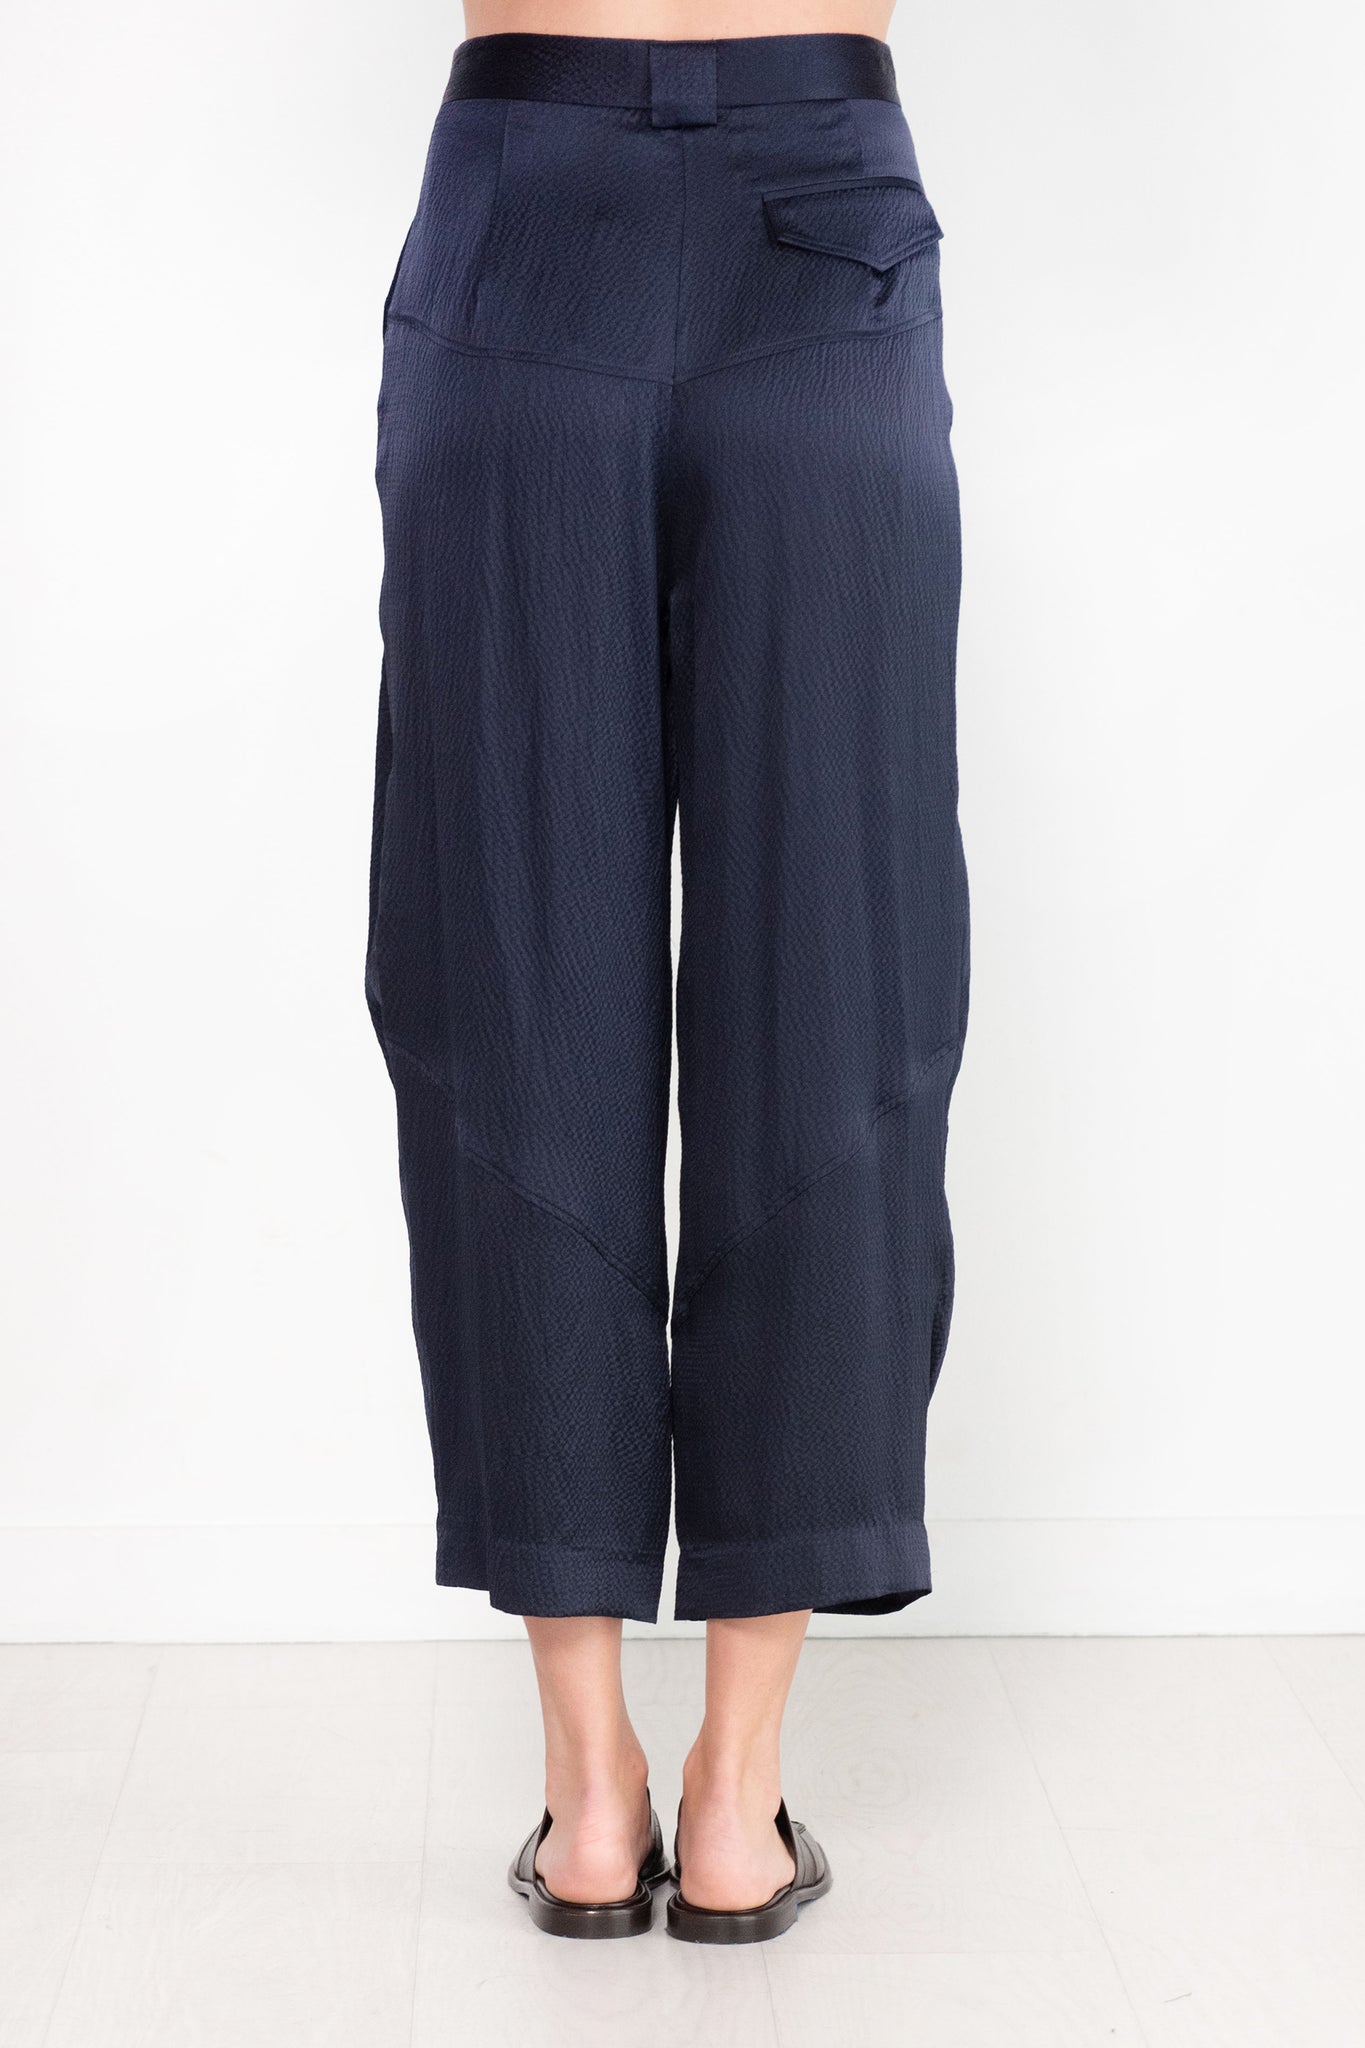 RACHEL COMEY - Cropped Divide Pant, Navy